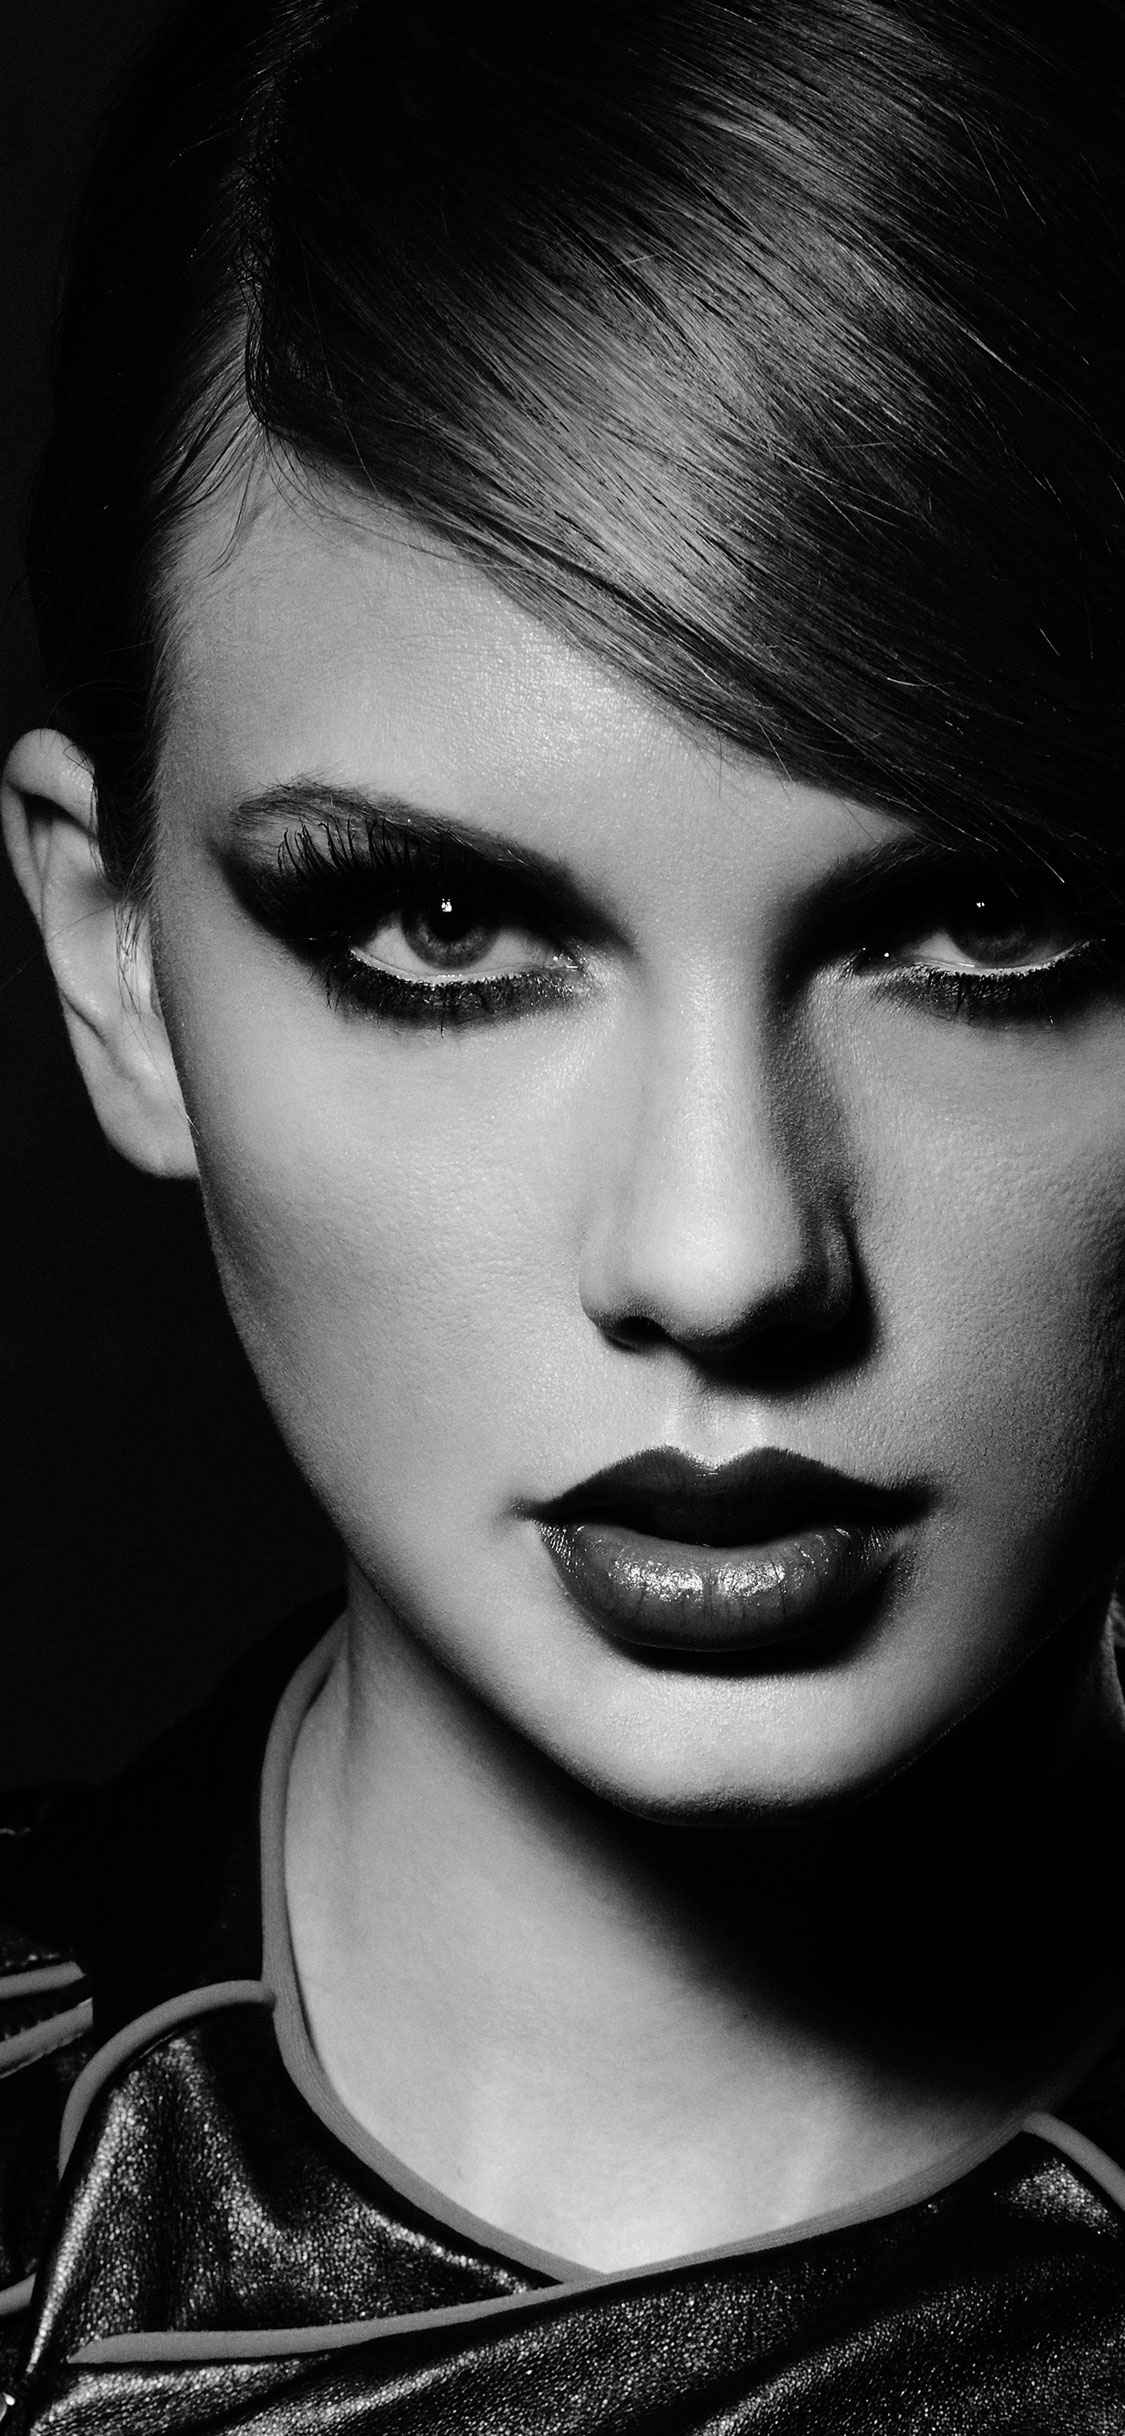 taylor swift iphone wallpaper,hair,face,eyebrow,lip,hairstyle